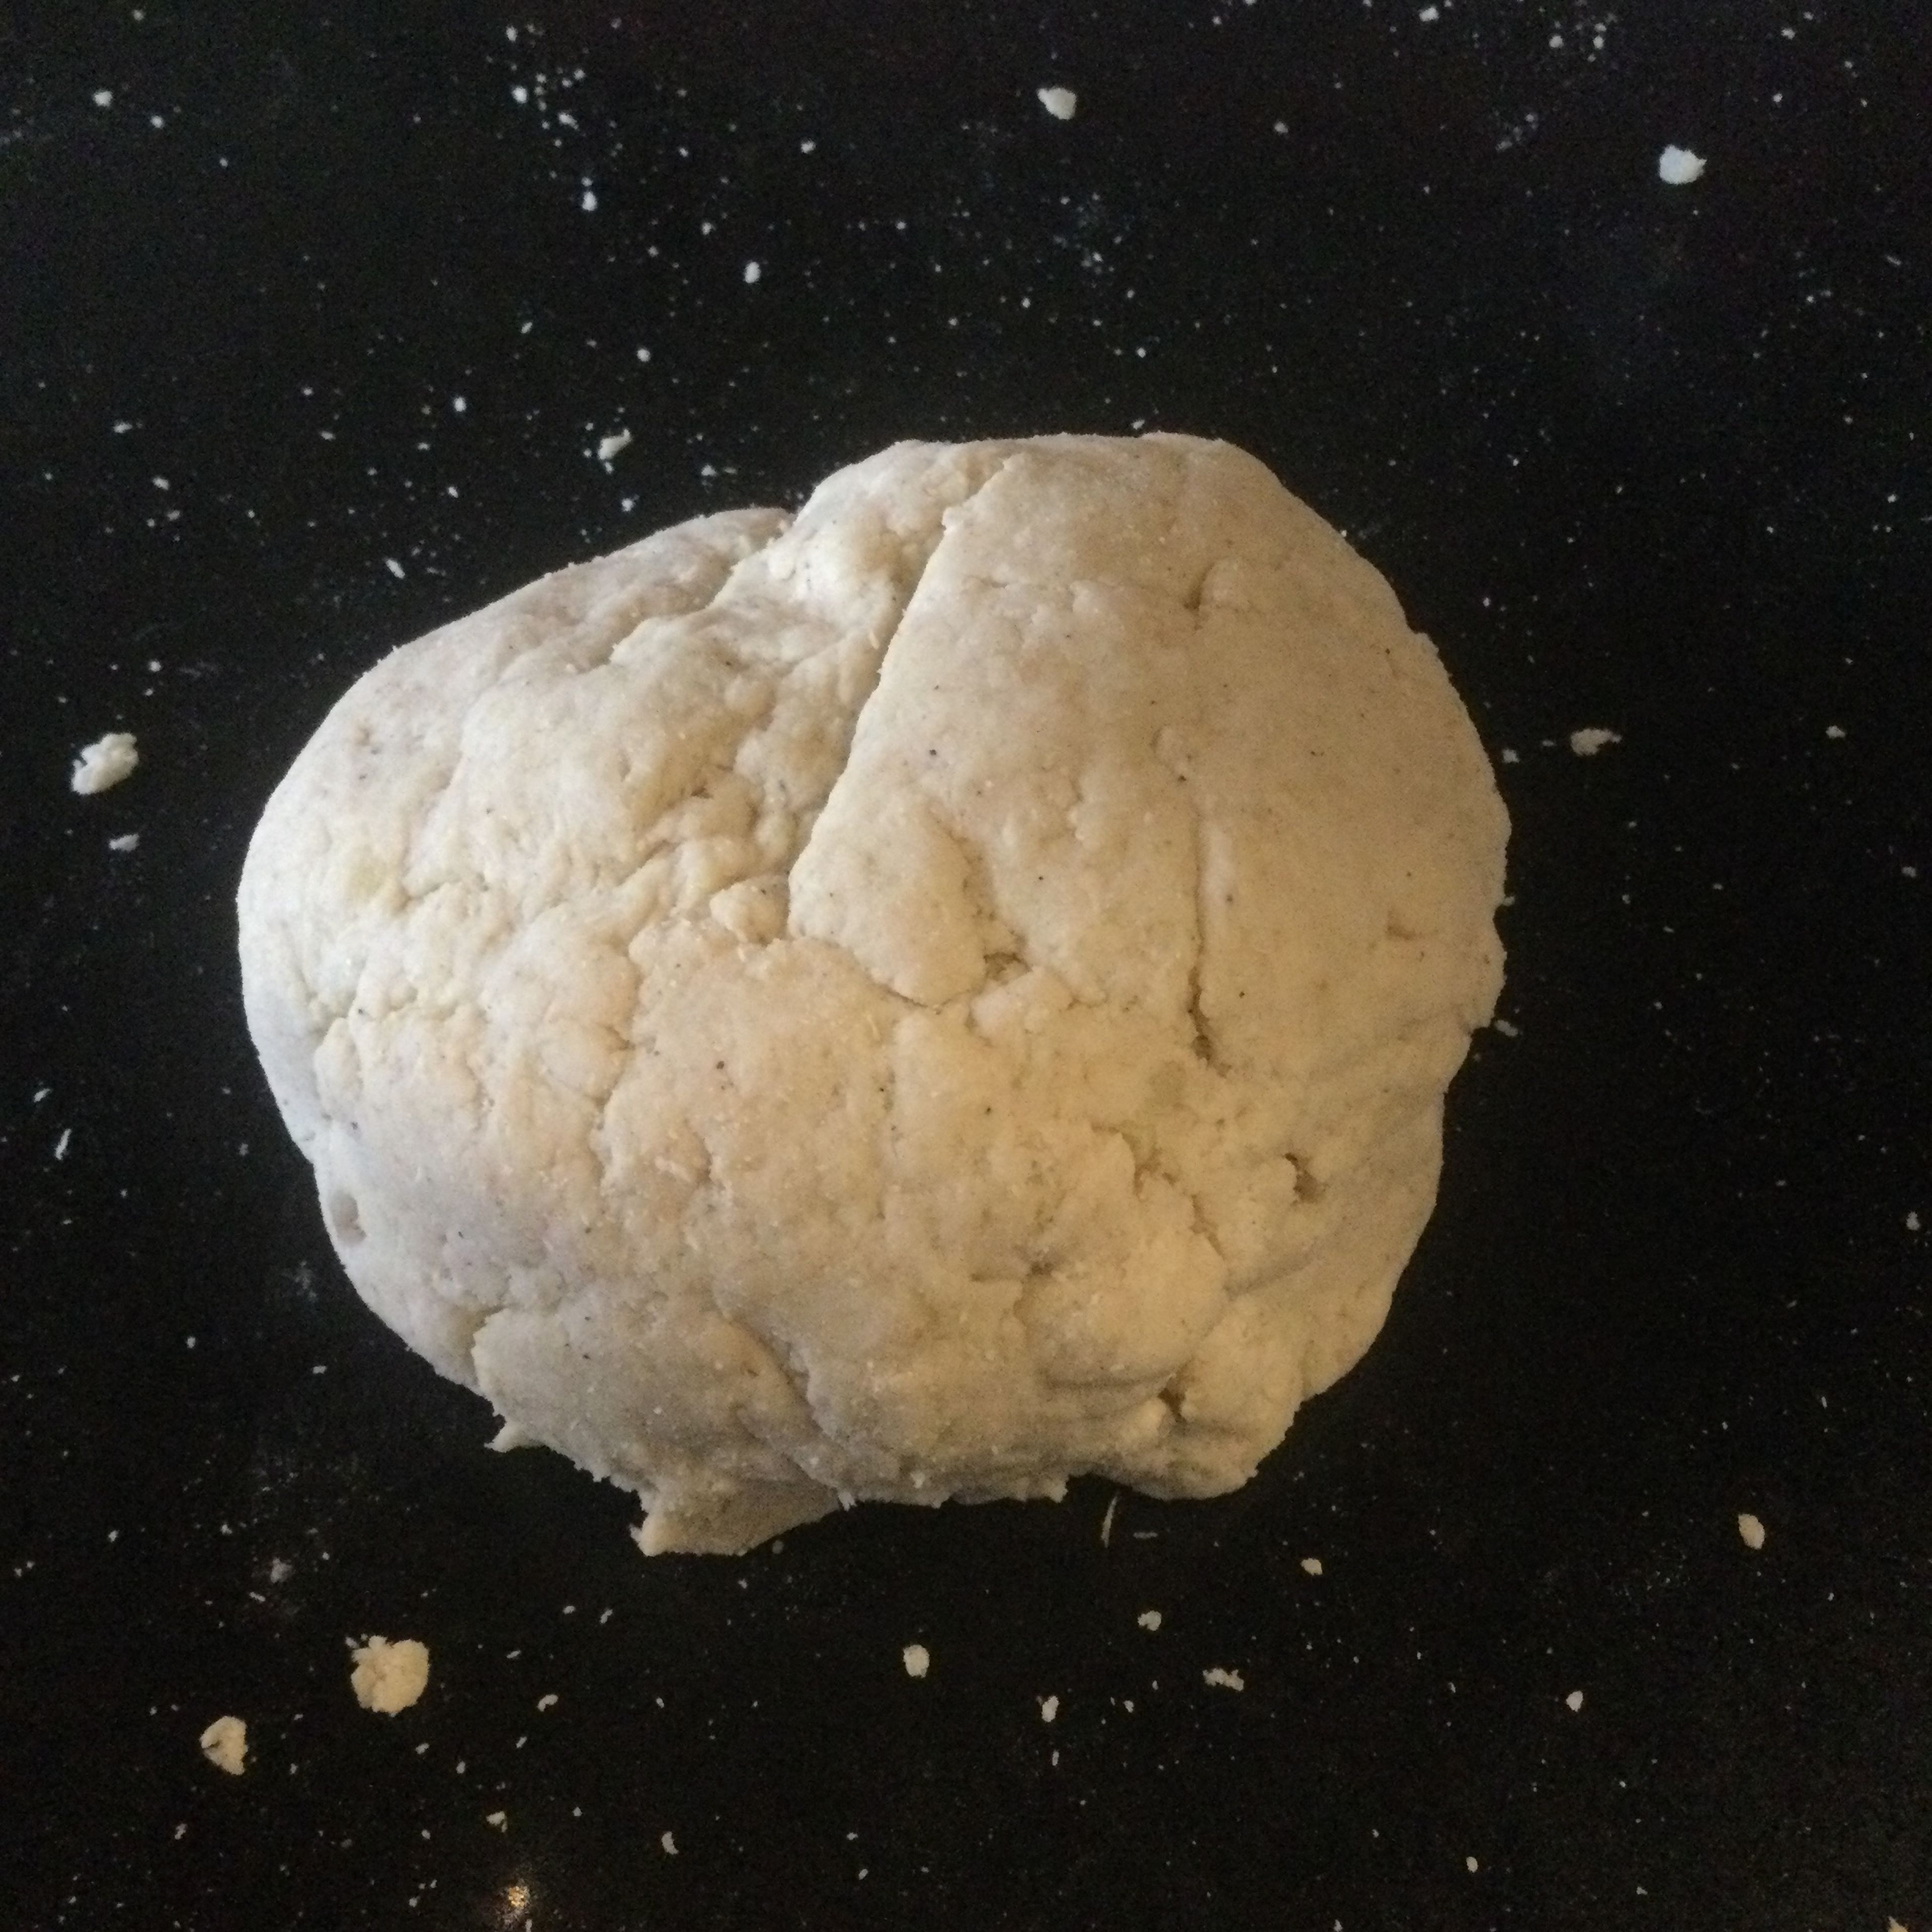 Knead the dough for a few seconds. Roll out to 15 cm round and transfer to a oiled baking sheet